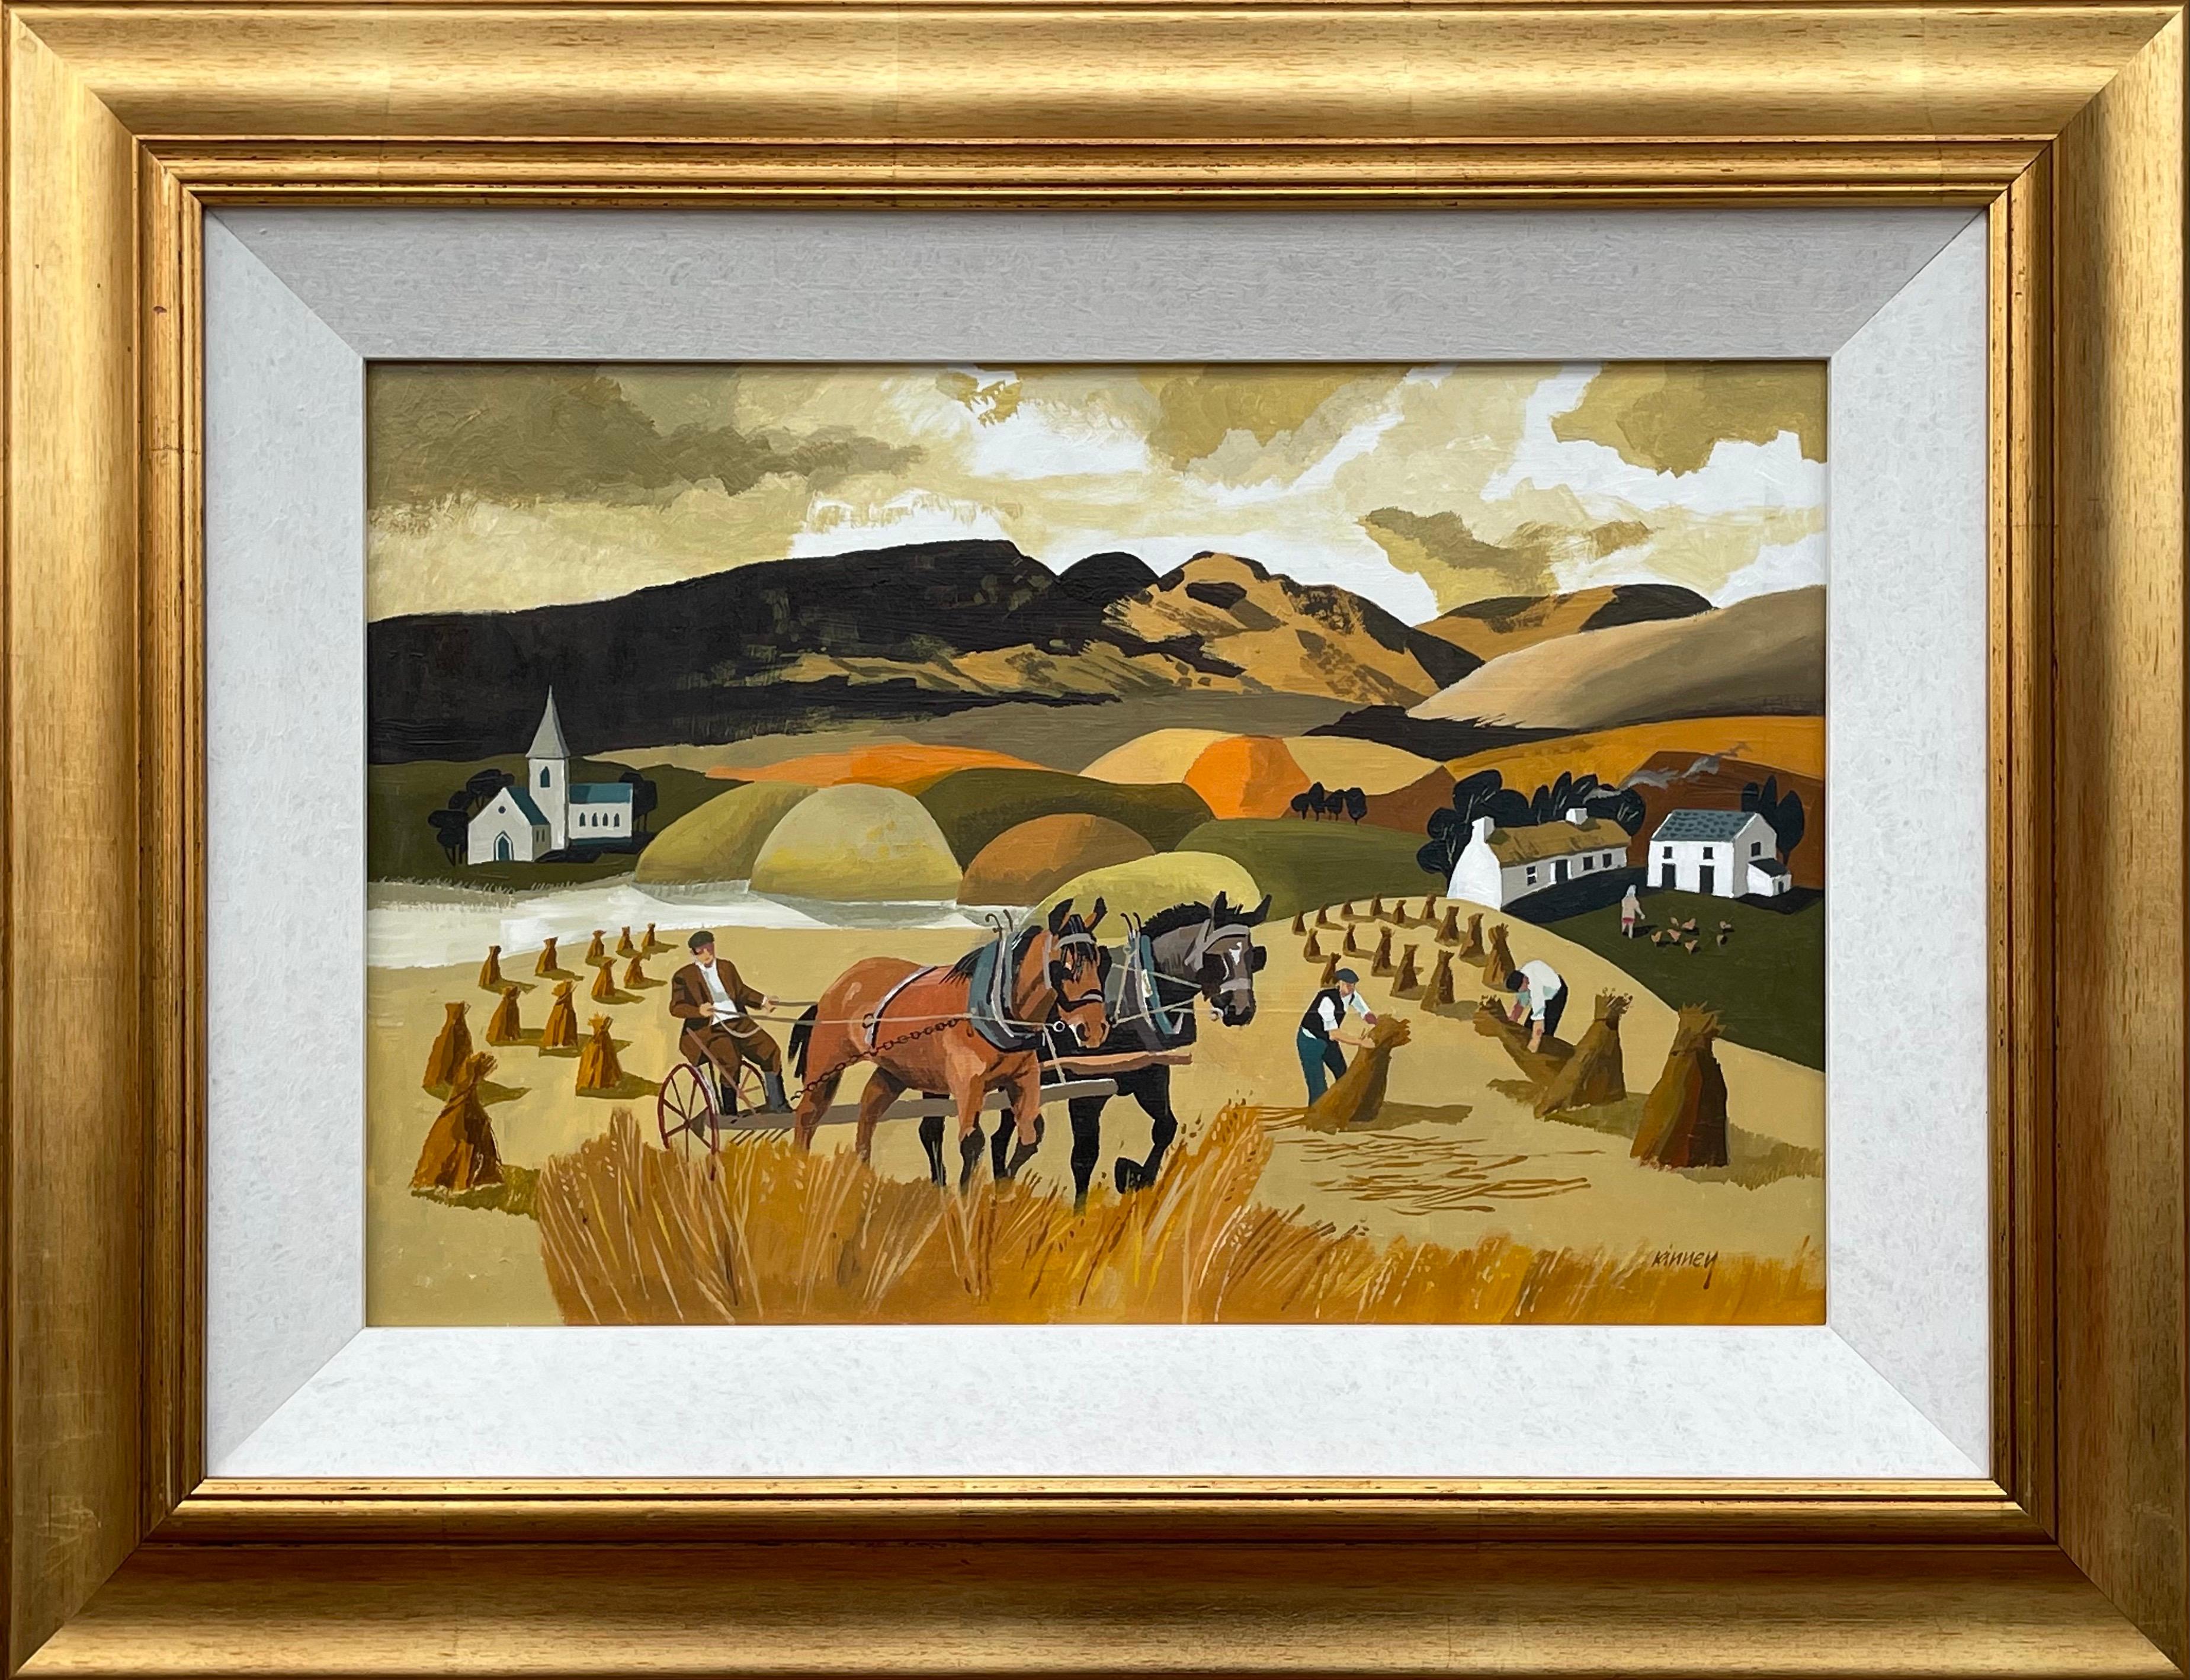 Abstract Landscape of Horses in Cornfield in Warm Colours by Modern Irish Artist